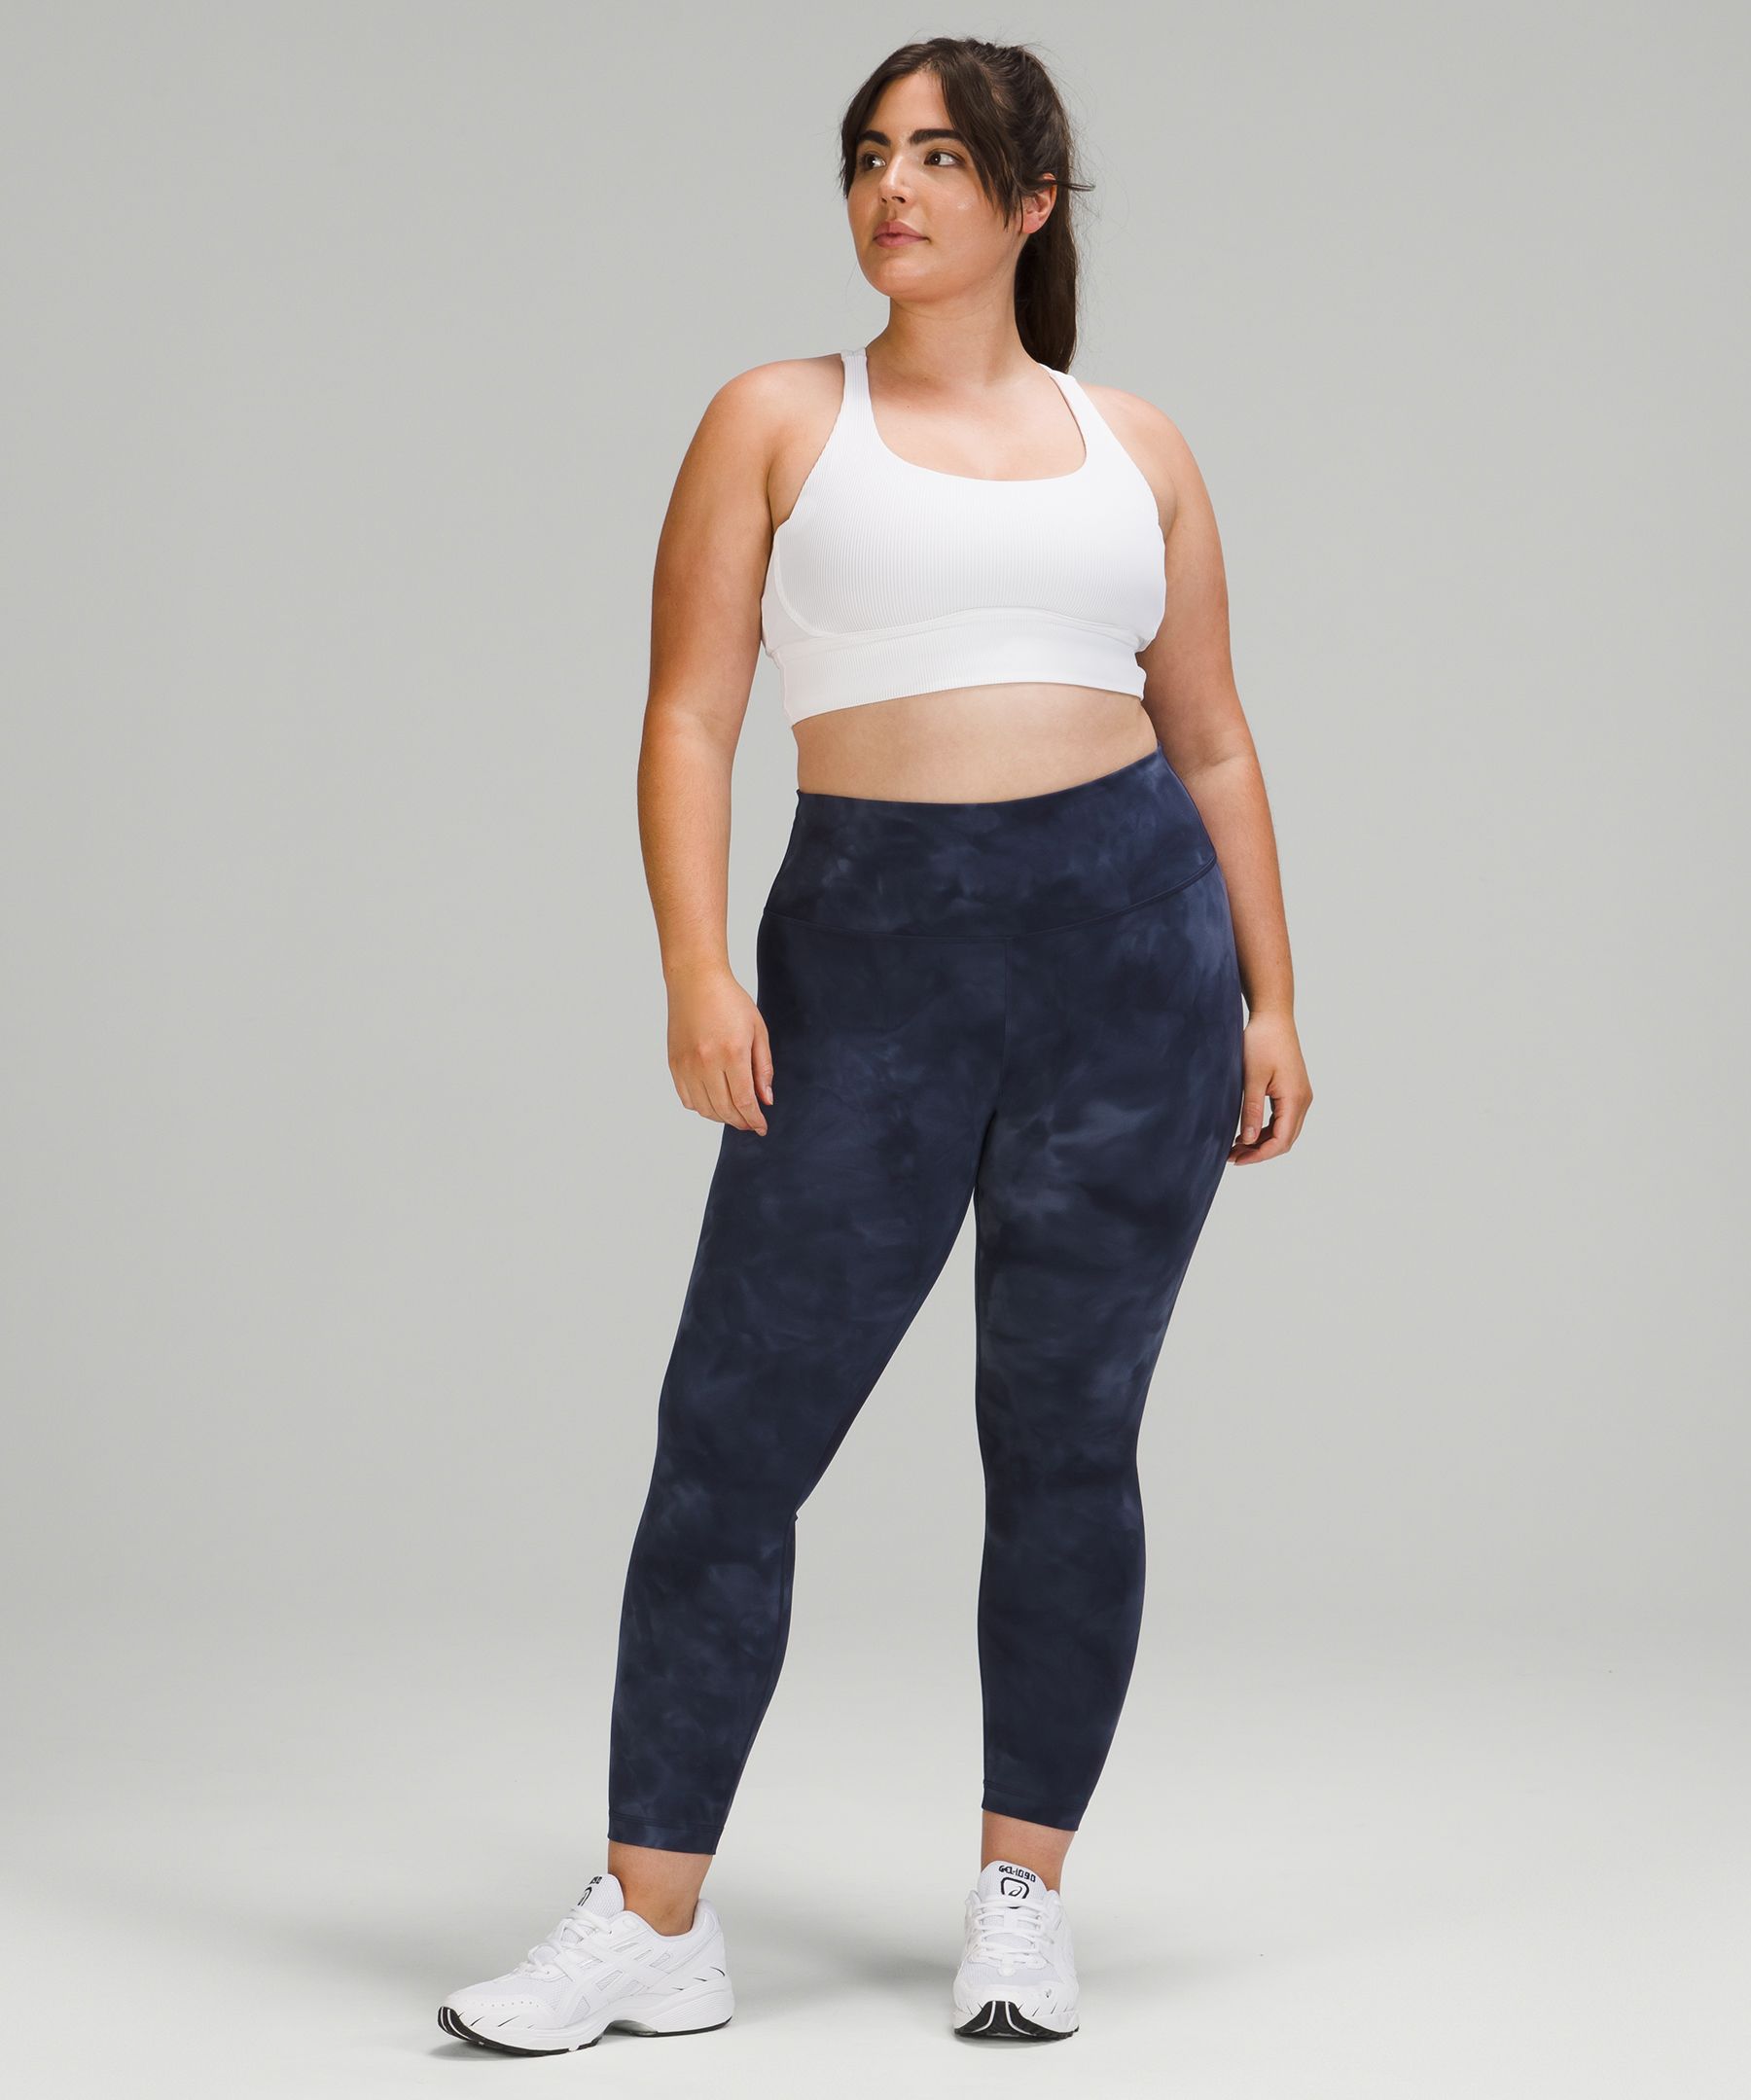 I've been sleeping on the Wunder Train collection for too long Cannot  believe I'm just now discovering these!!!! Diamond dye 6” short (size8),  align tank (size10) : r/lululemon